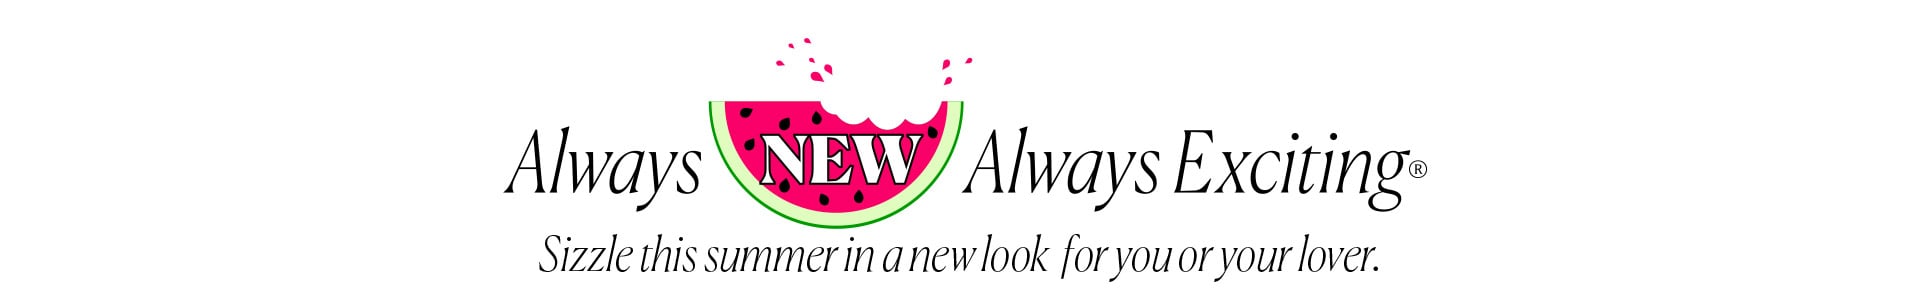 Always New Always Exciting - Sizzle this summer in a new look for you or your lover.